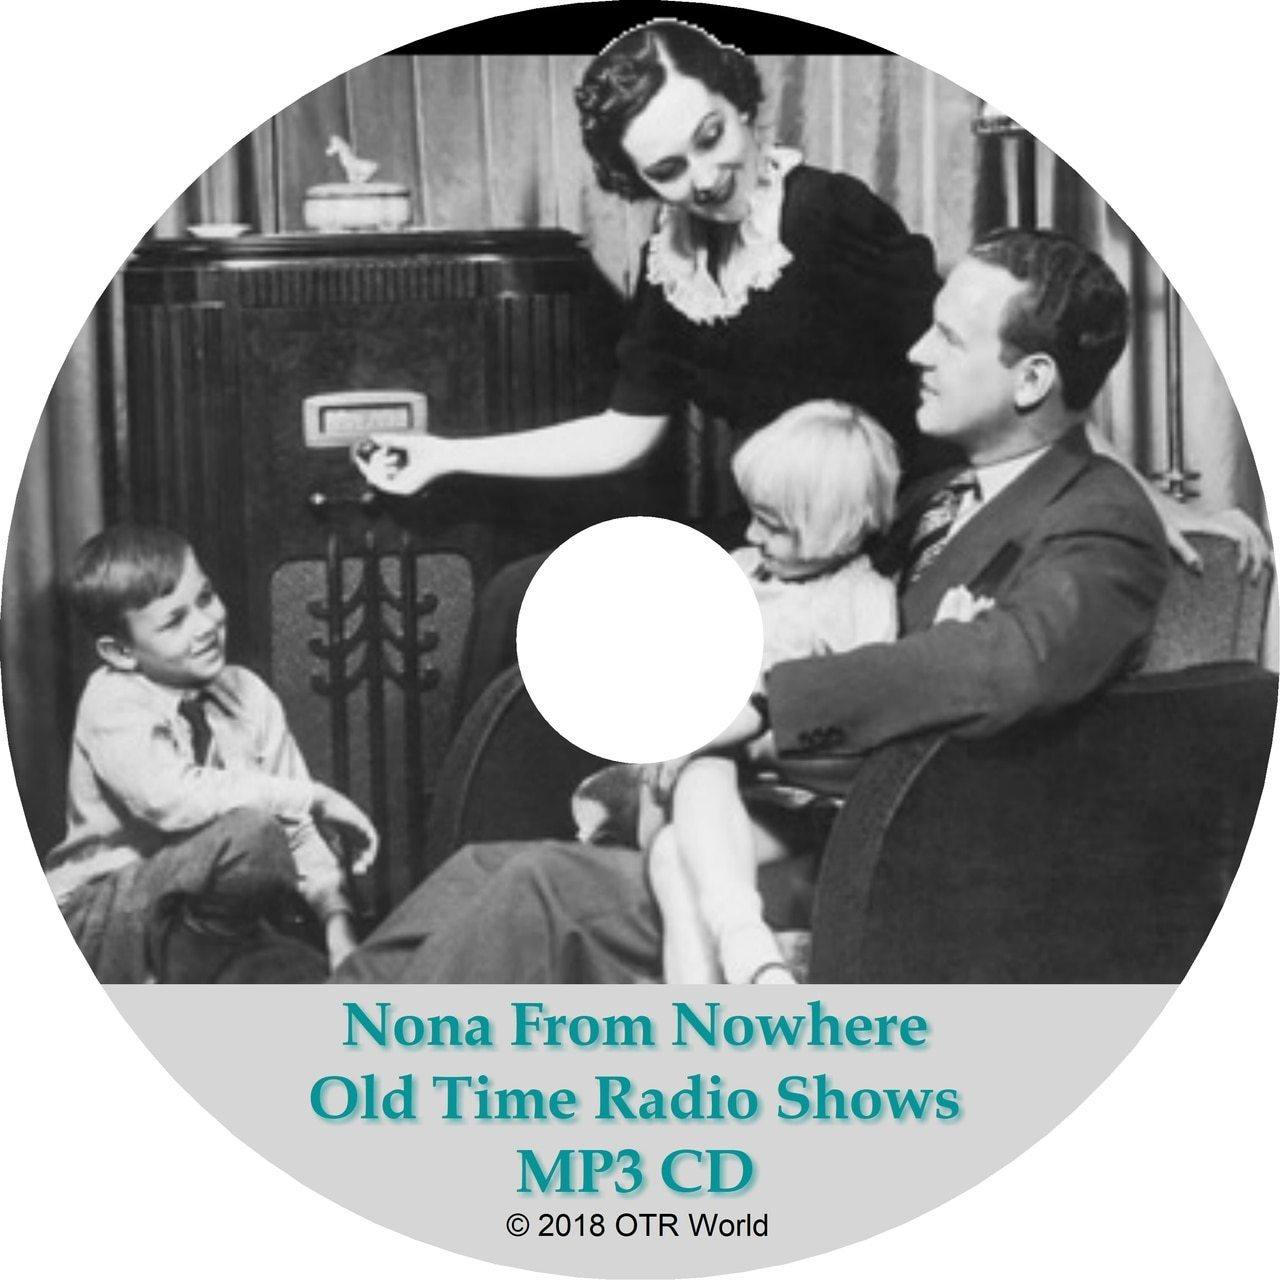 Nona From Nowhere Old Time Radio Shows OTR OTRS 5 Episodes MP3 CD-R - OTR World